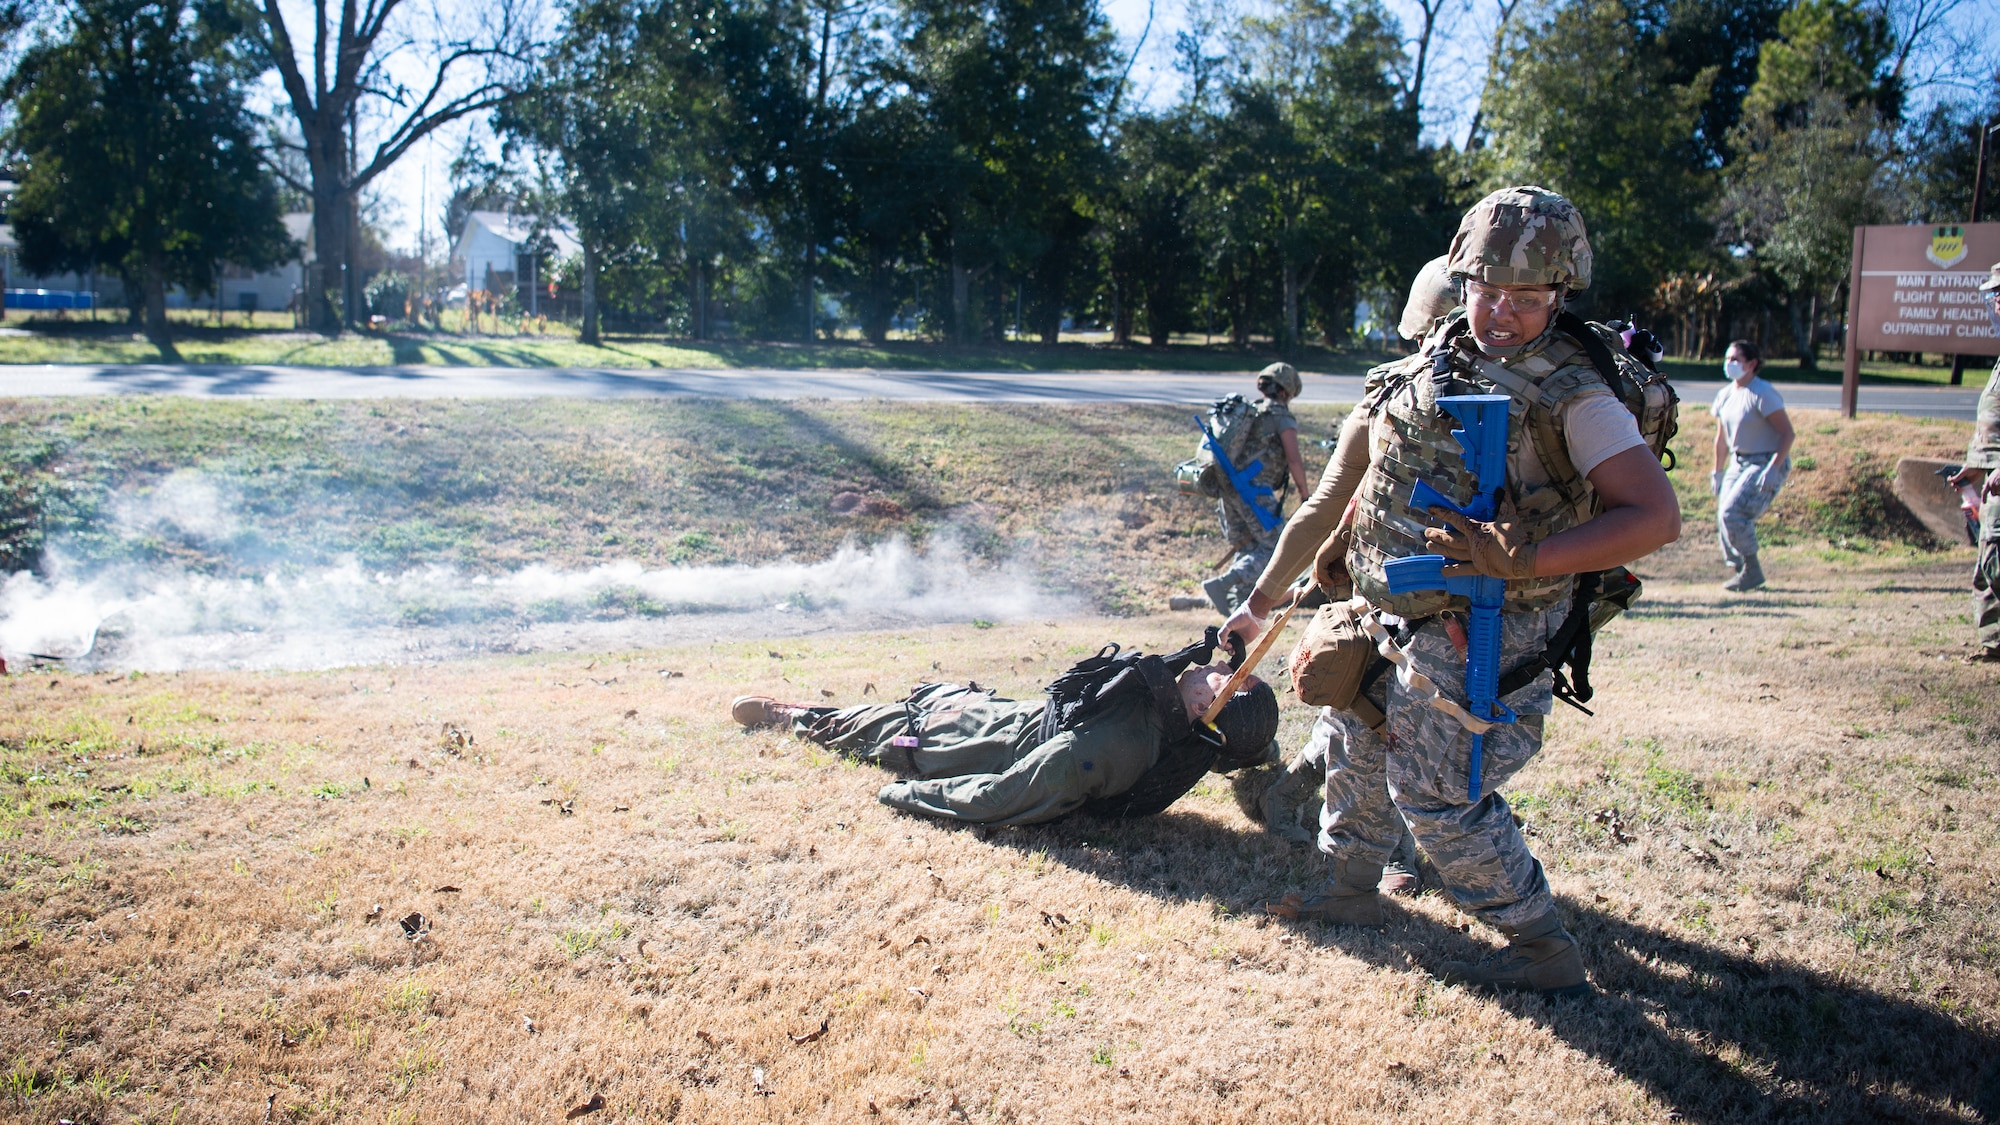 Staff Sgt. Jelisa Adams, 2nd Healthcare Operations Squadron medical technician, and Senior Airman Nikolas Swift, 2nd HCOS medical technician, drag a training dummy during a Tactical Combat Casualty Care (TCCC) field training exercise at Barksdale Air Force Base, La., Dec. 9, 2020.